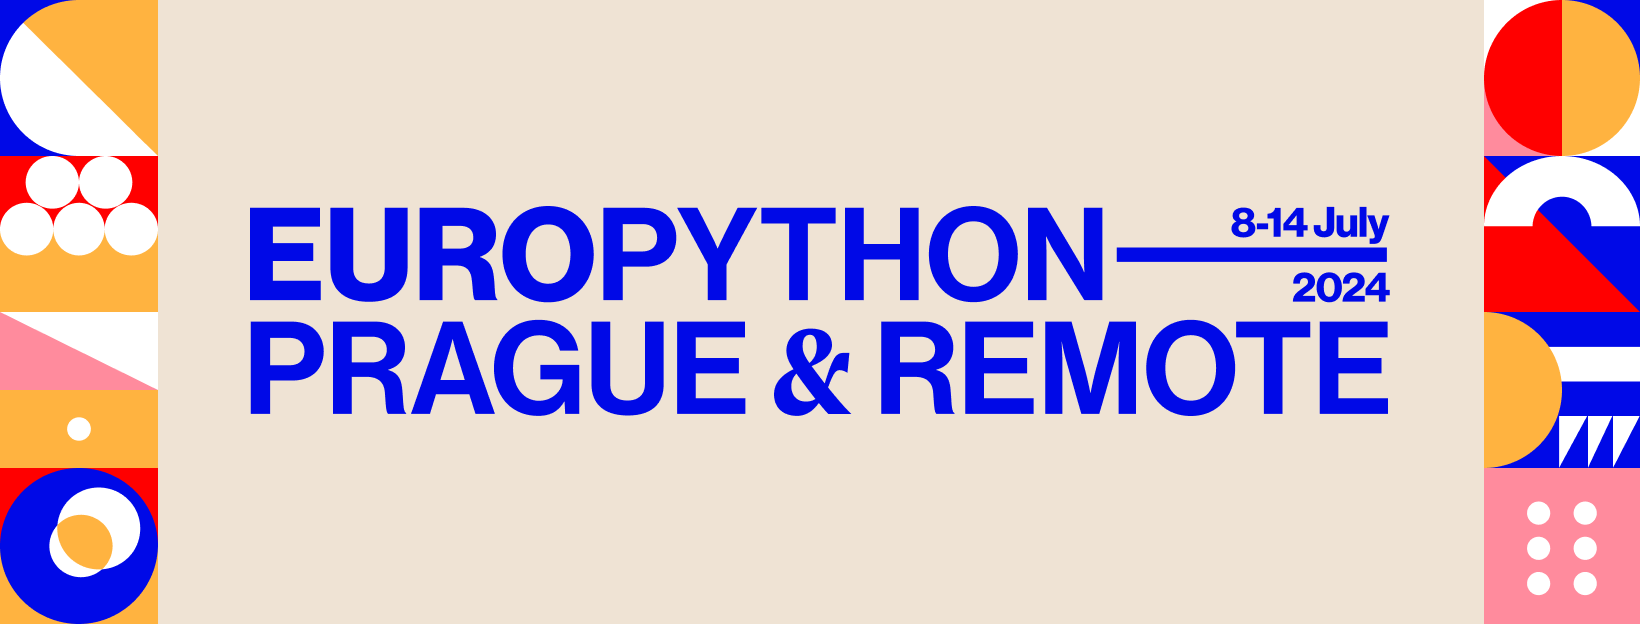 A banner depicting the logo and the dates for EuroPython 2024.